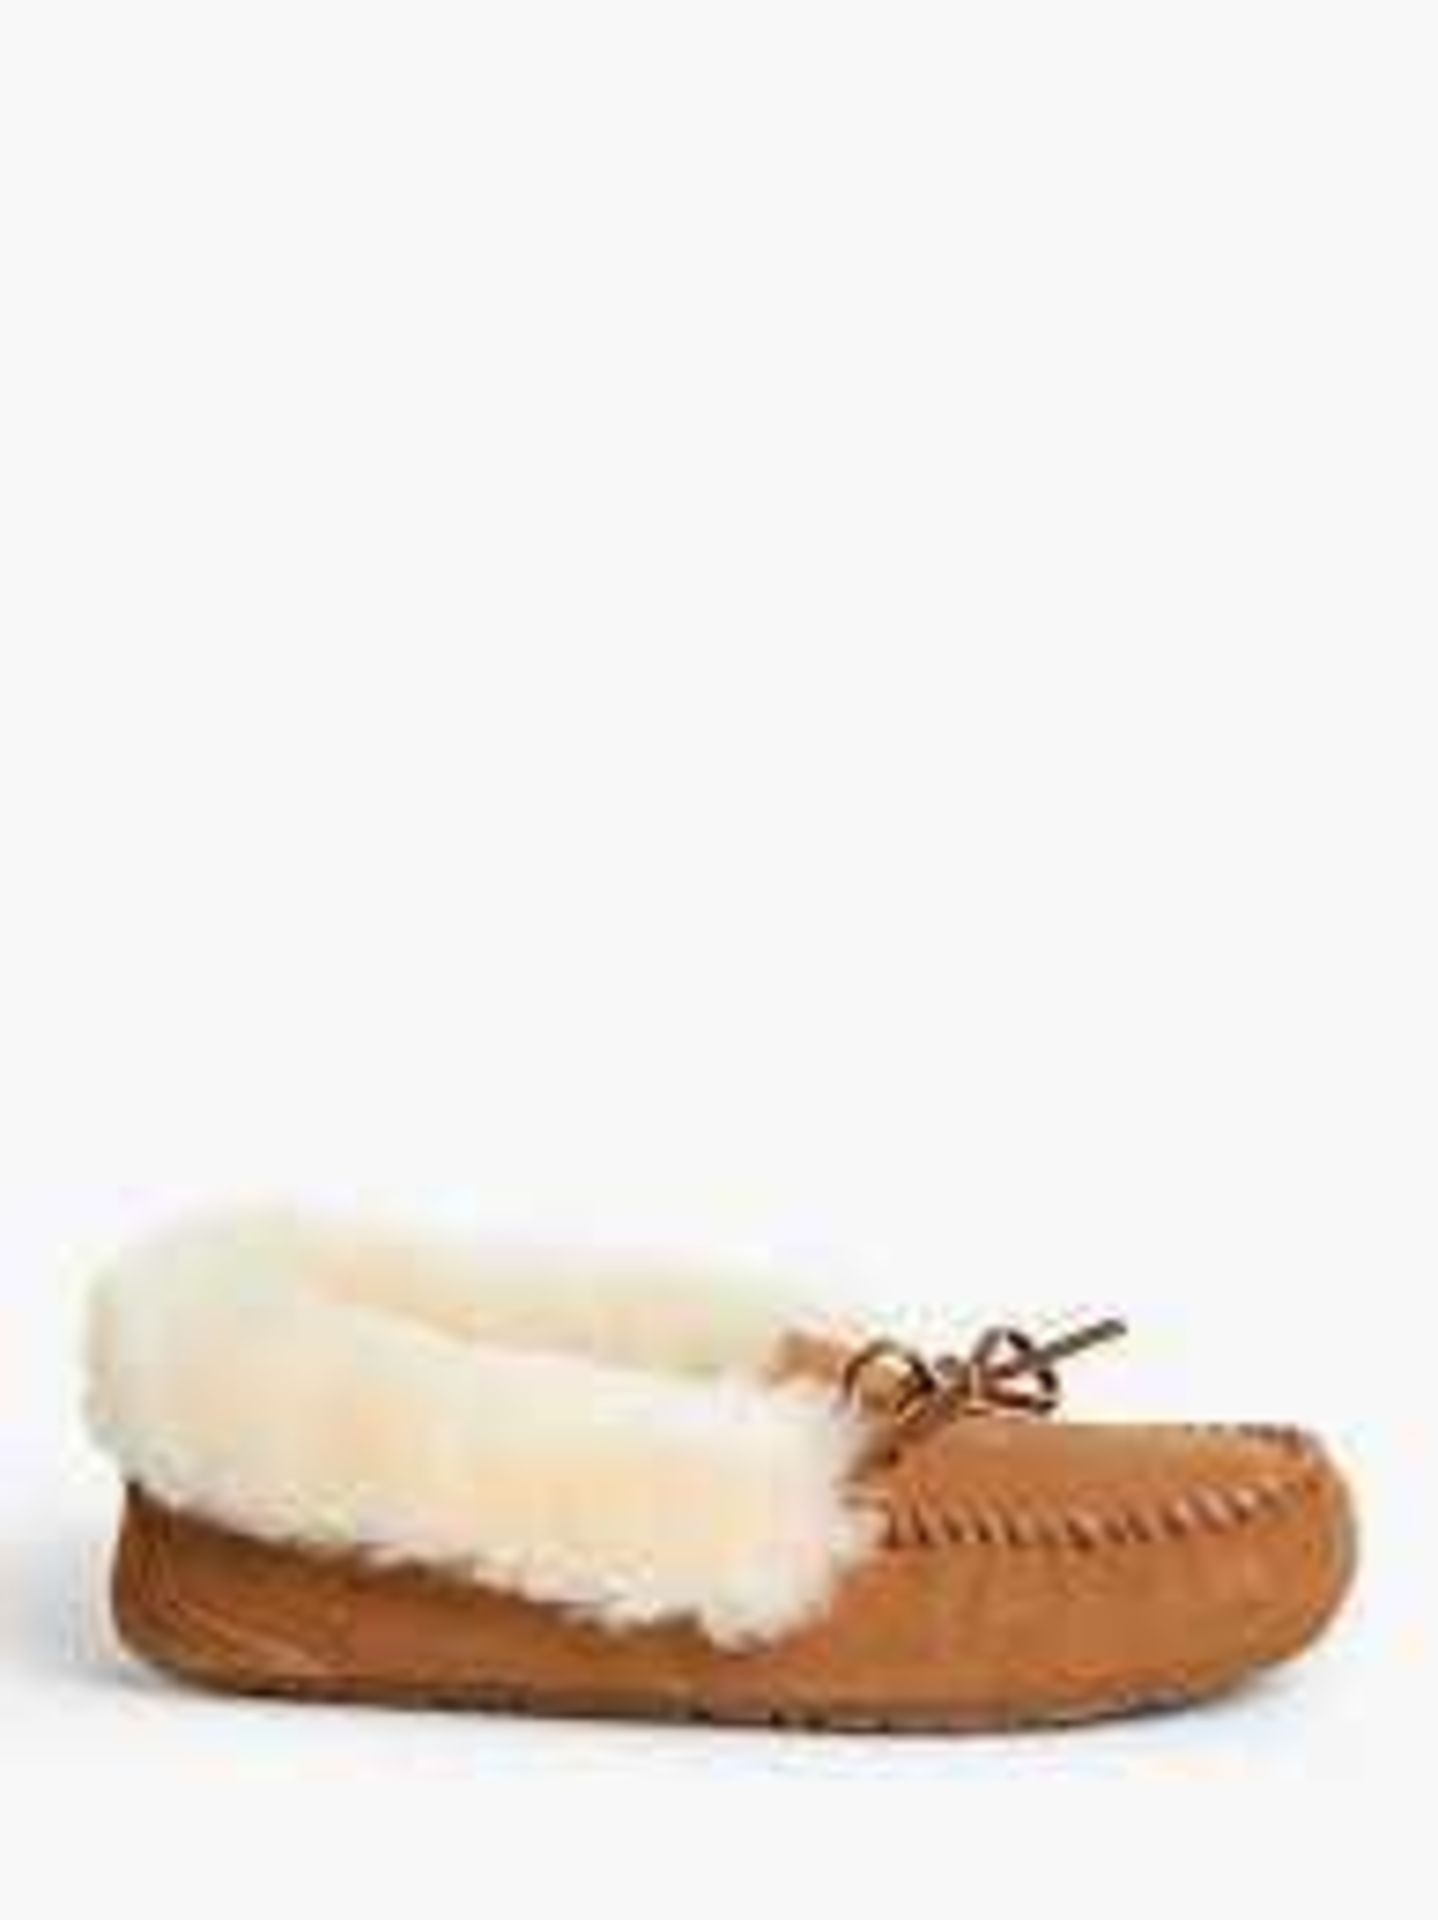 (Jb) RRP £200 To Contain 3 Boxed John Lewis And Partners Items To Include 100% Sheepskin Slippers In